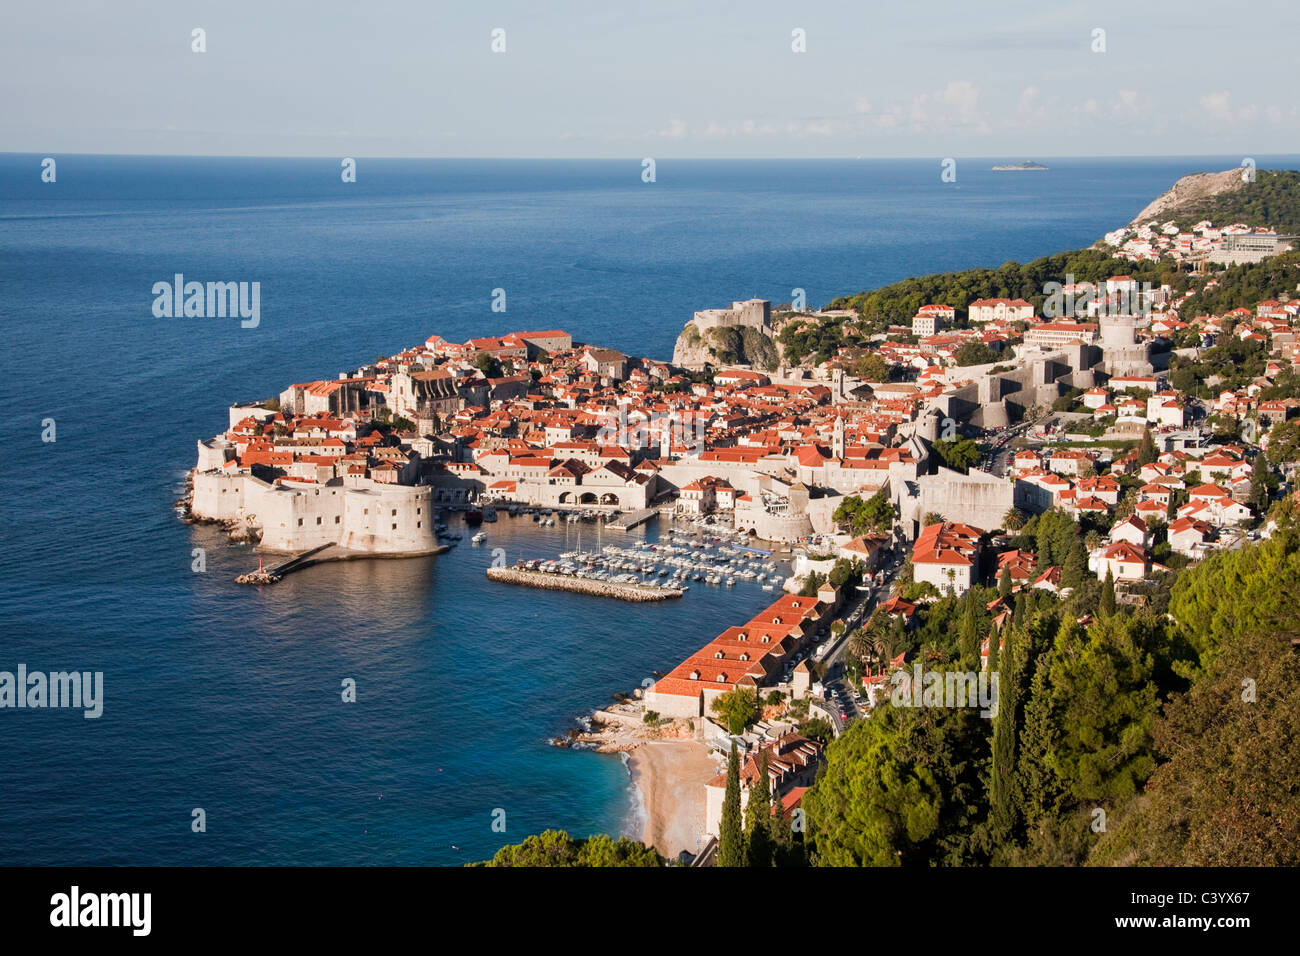 Croatia, Europe, Dubrovnik, Old Town, world cultural heritage, walls, roofs, harbour, port, Stock Photo